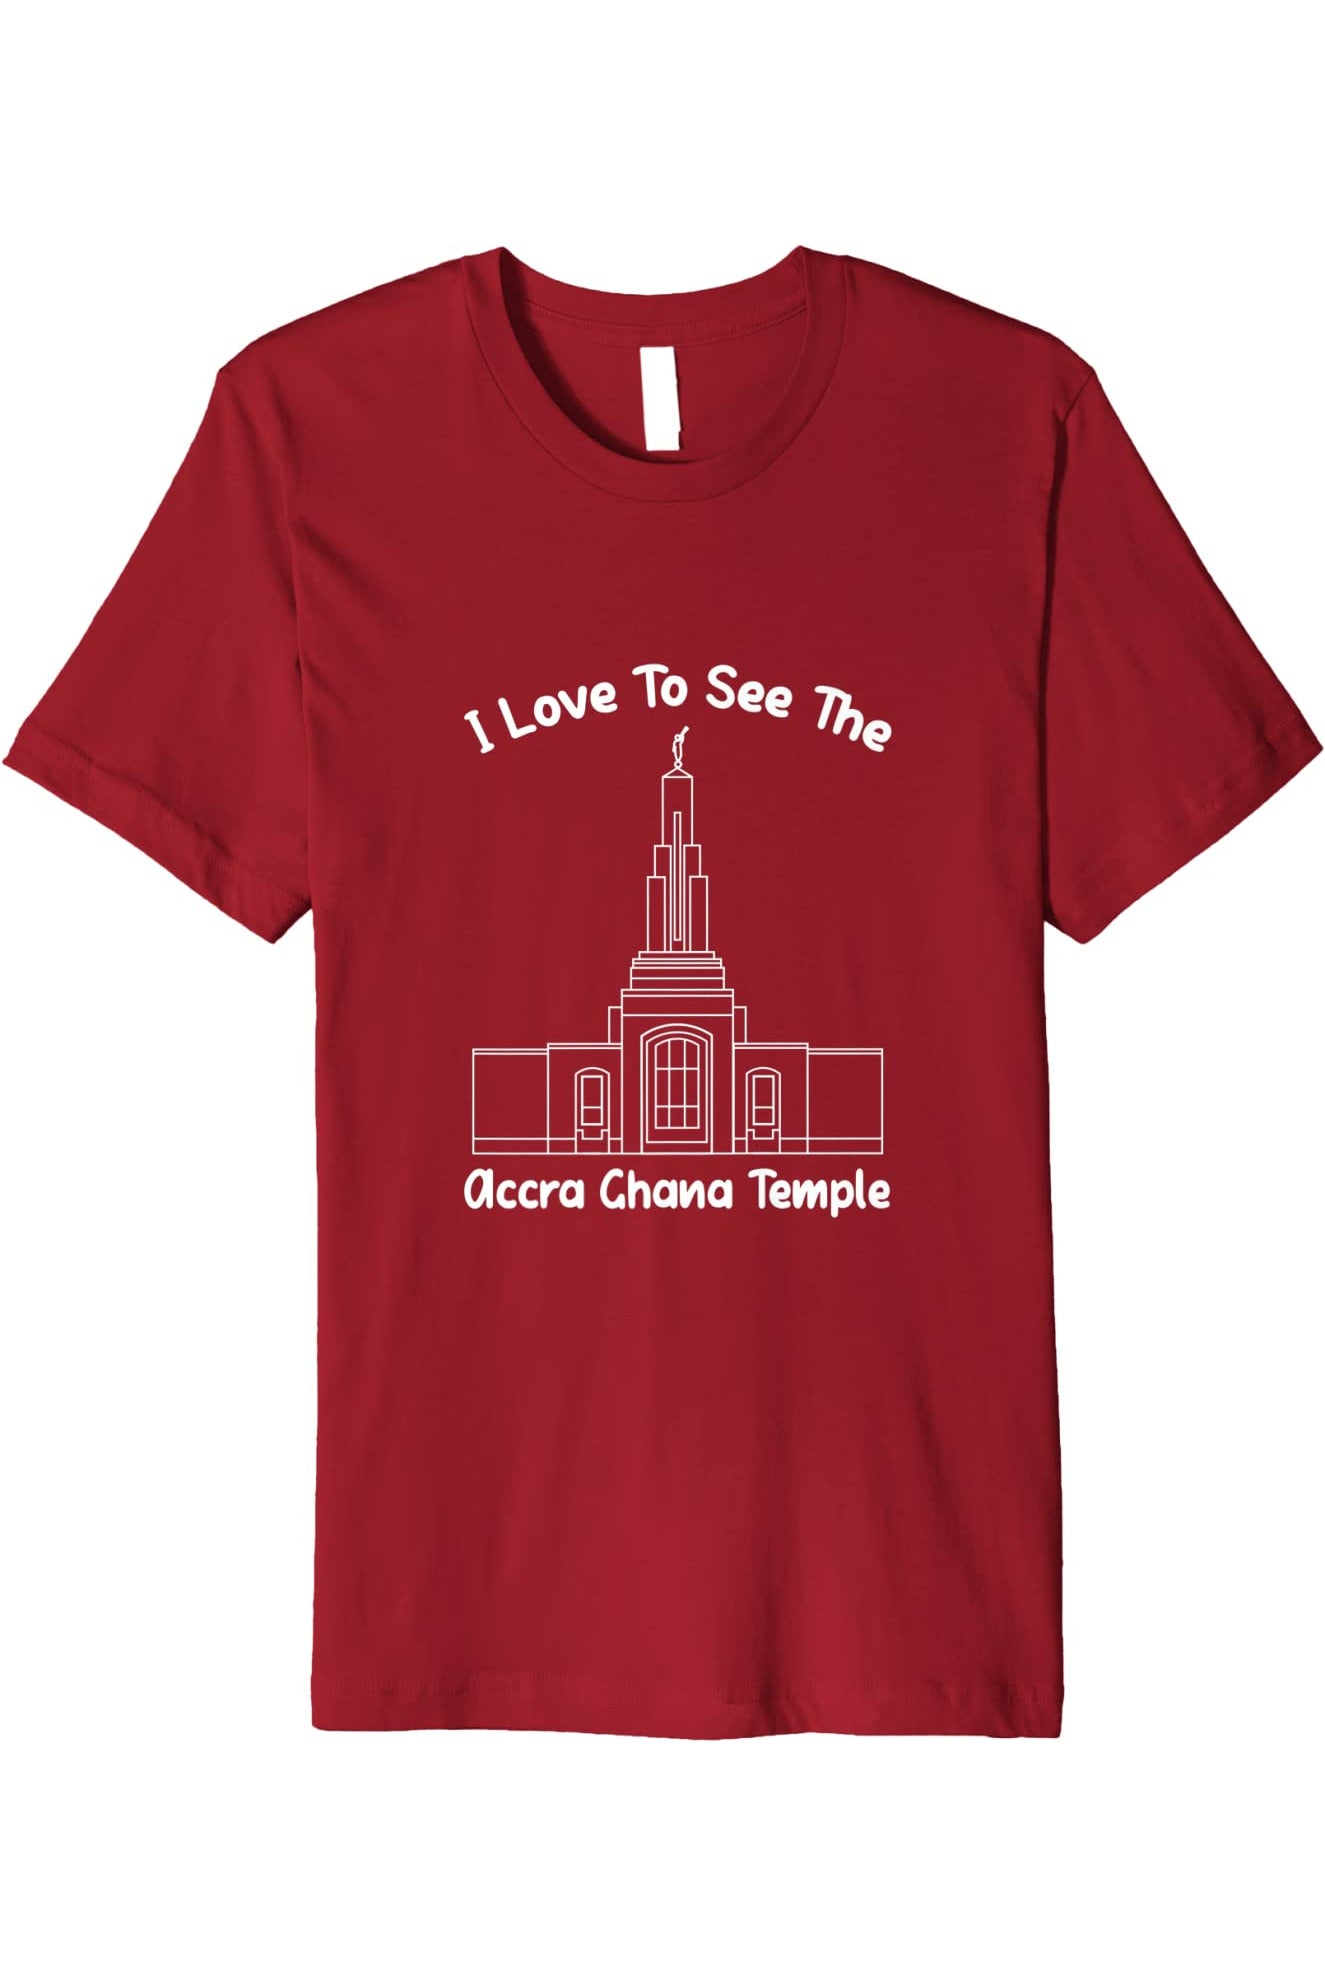 Accra Ghana Temple T-Shirt - Premium - Primary Style (English) US